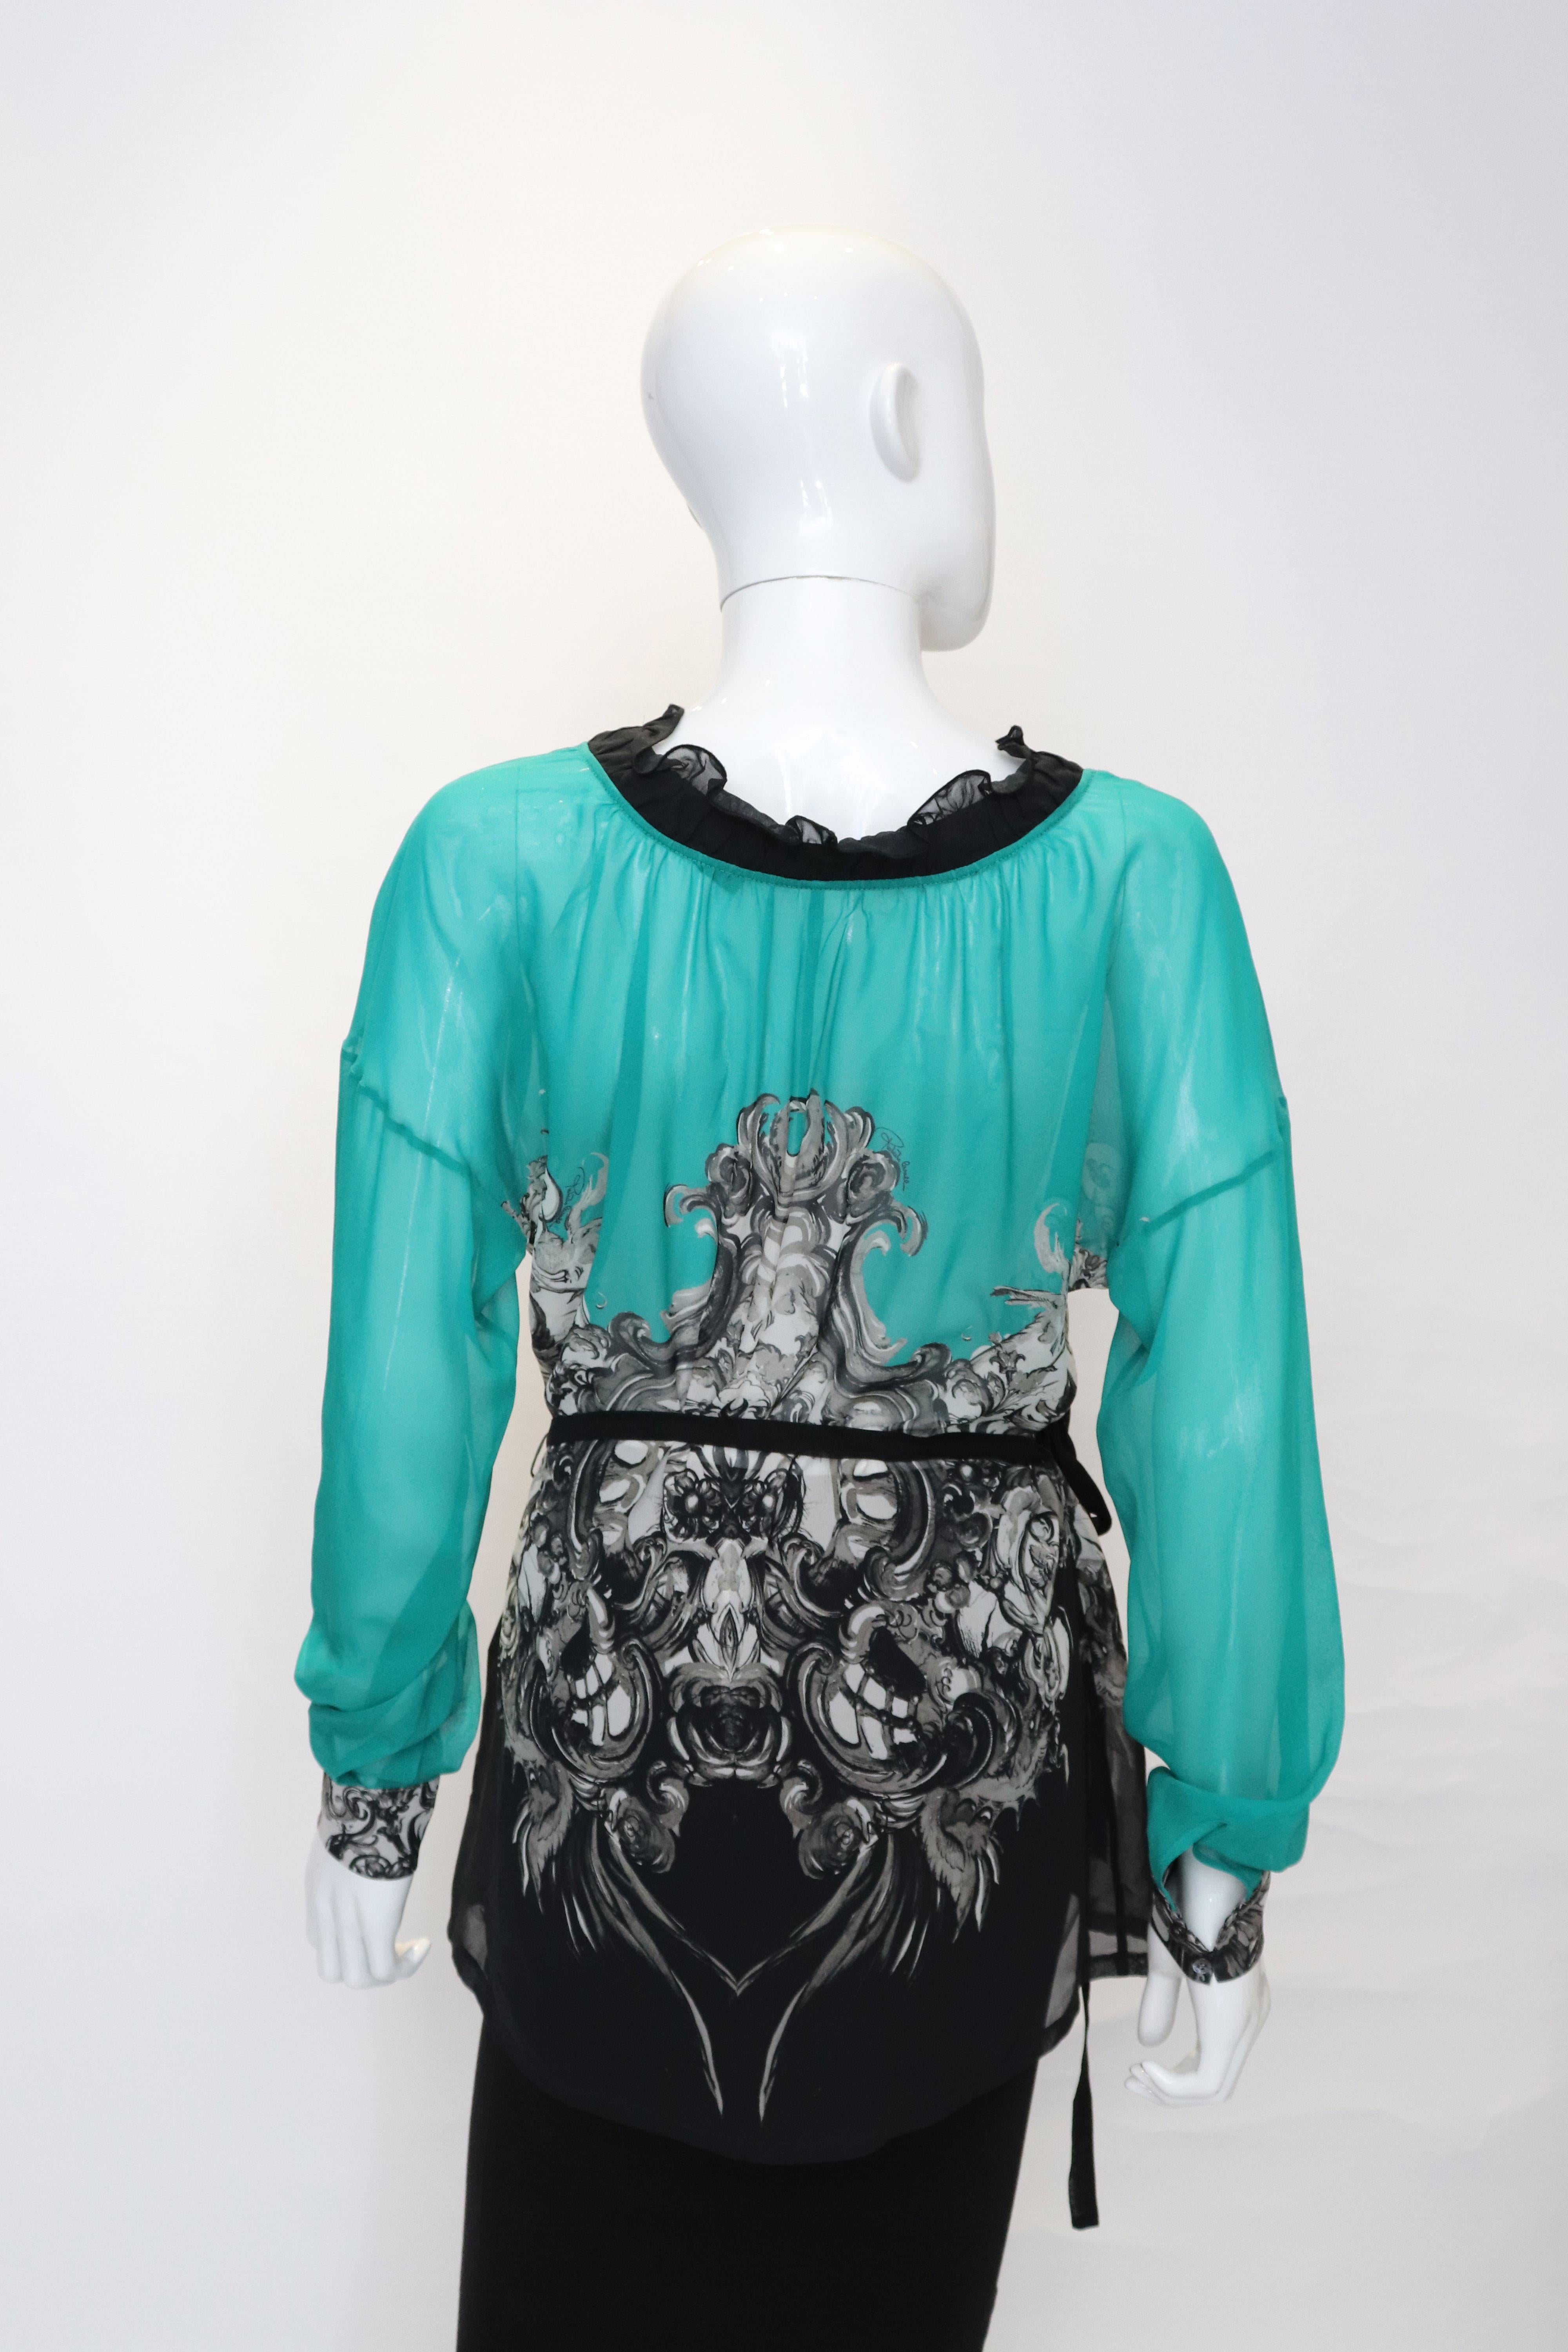 A great silk top by Roberto Cavalli. The top is emerald green and black in colour with a frill neckline and short sleeves. It has a black silk tie belt.